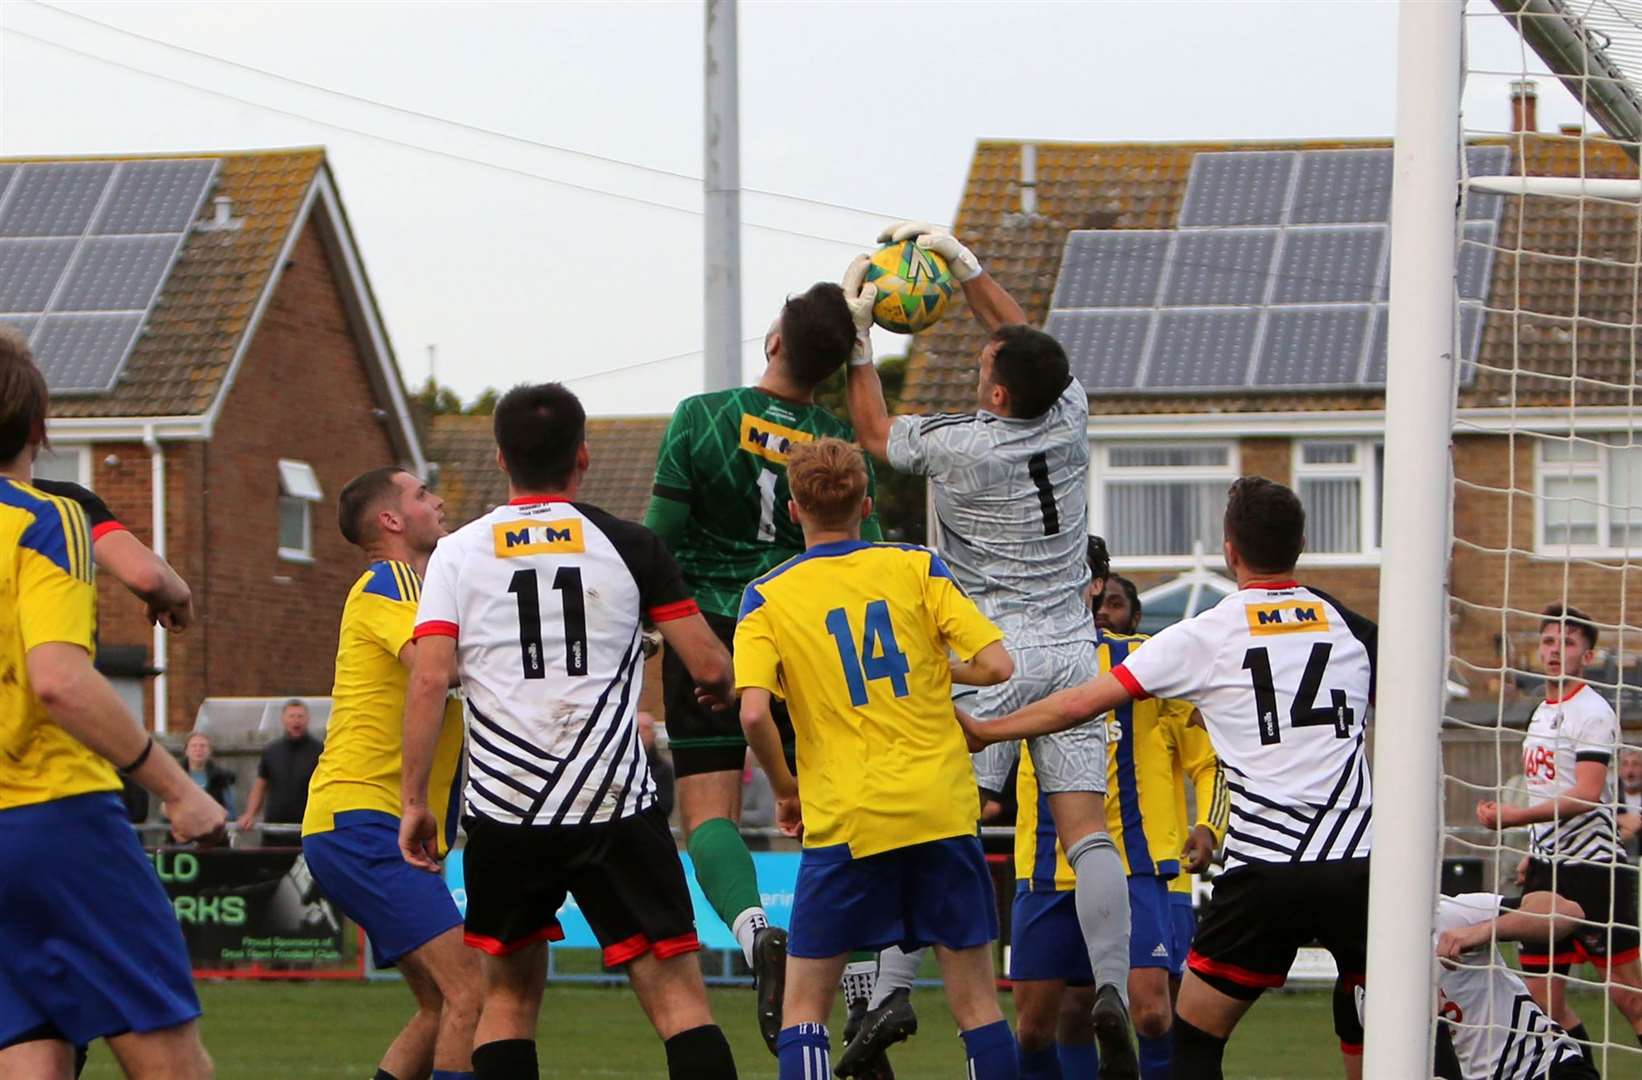 Deal keeper Henry Newcombe just fails to connect with a header deep into injury time. Picture: Paul Willmott